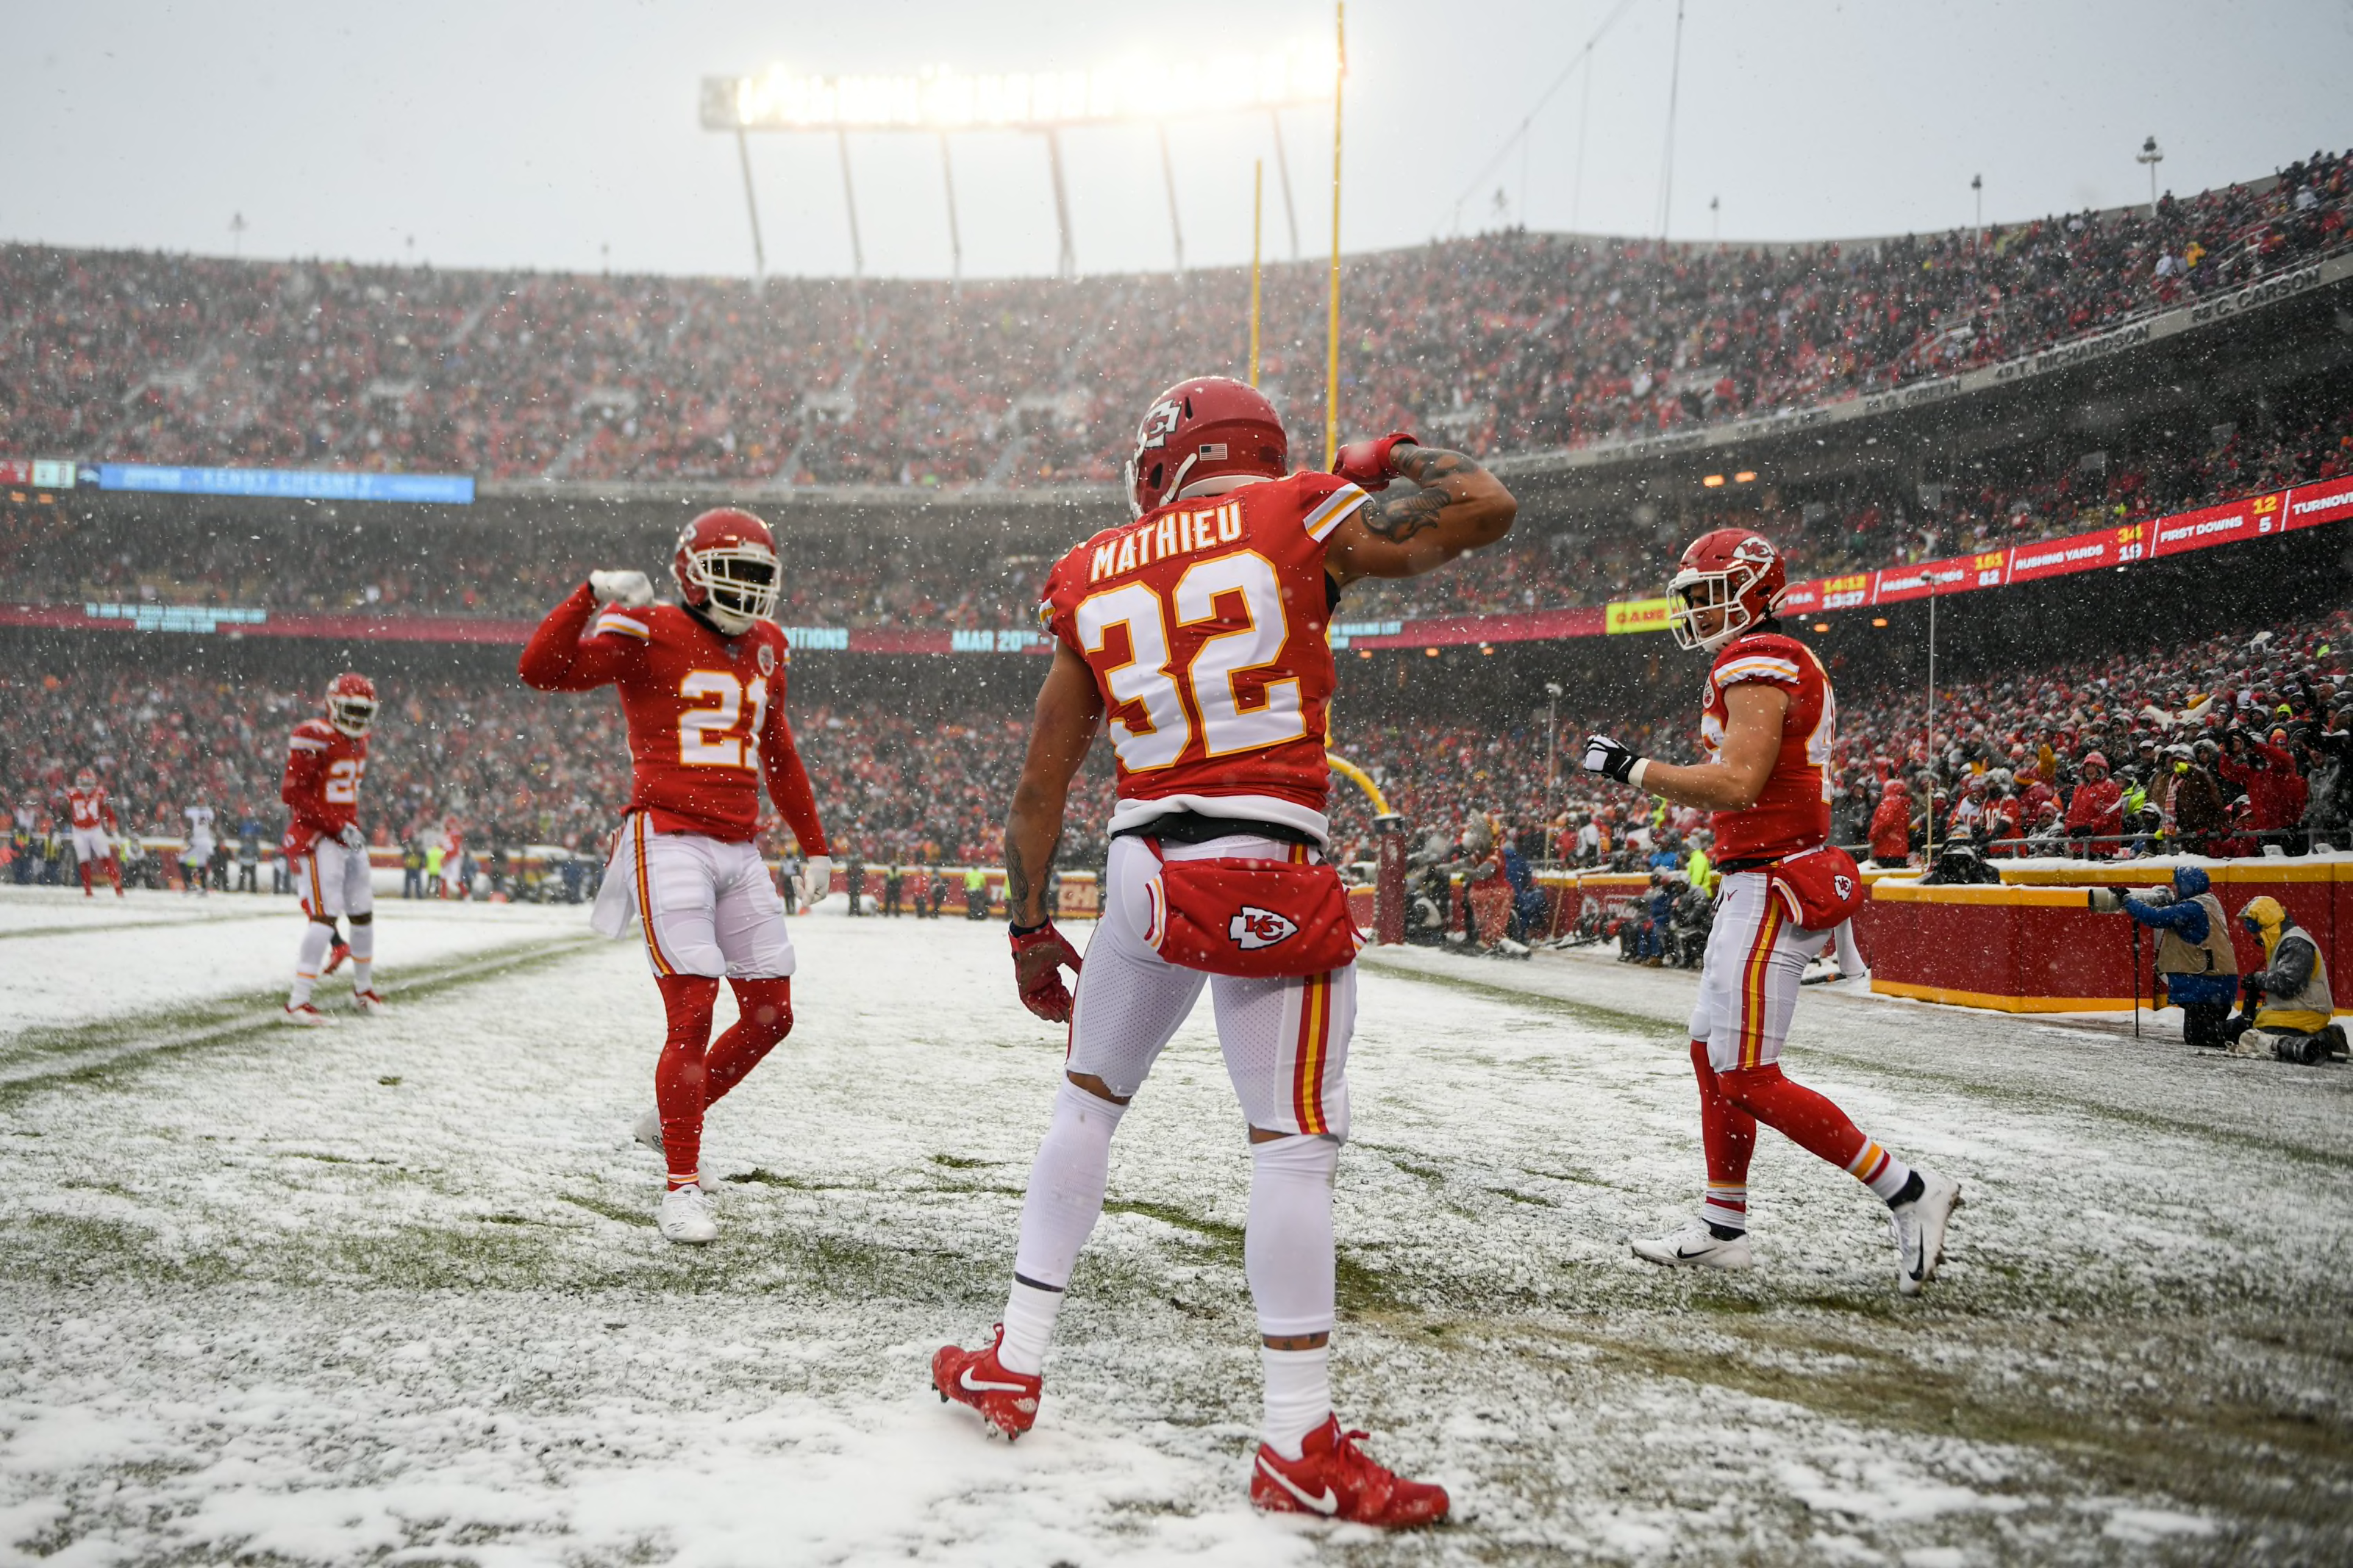 KC Chiefs 2019 is best chance at Super Bowl run in long time